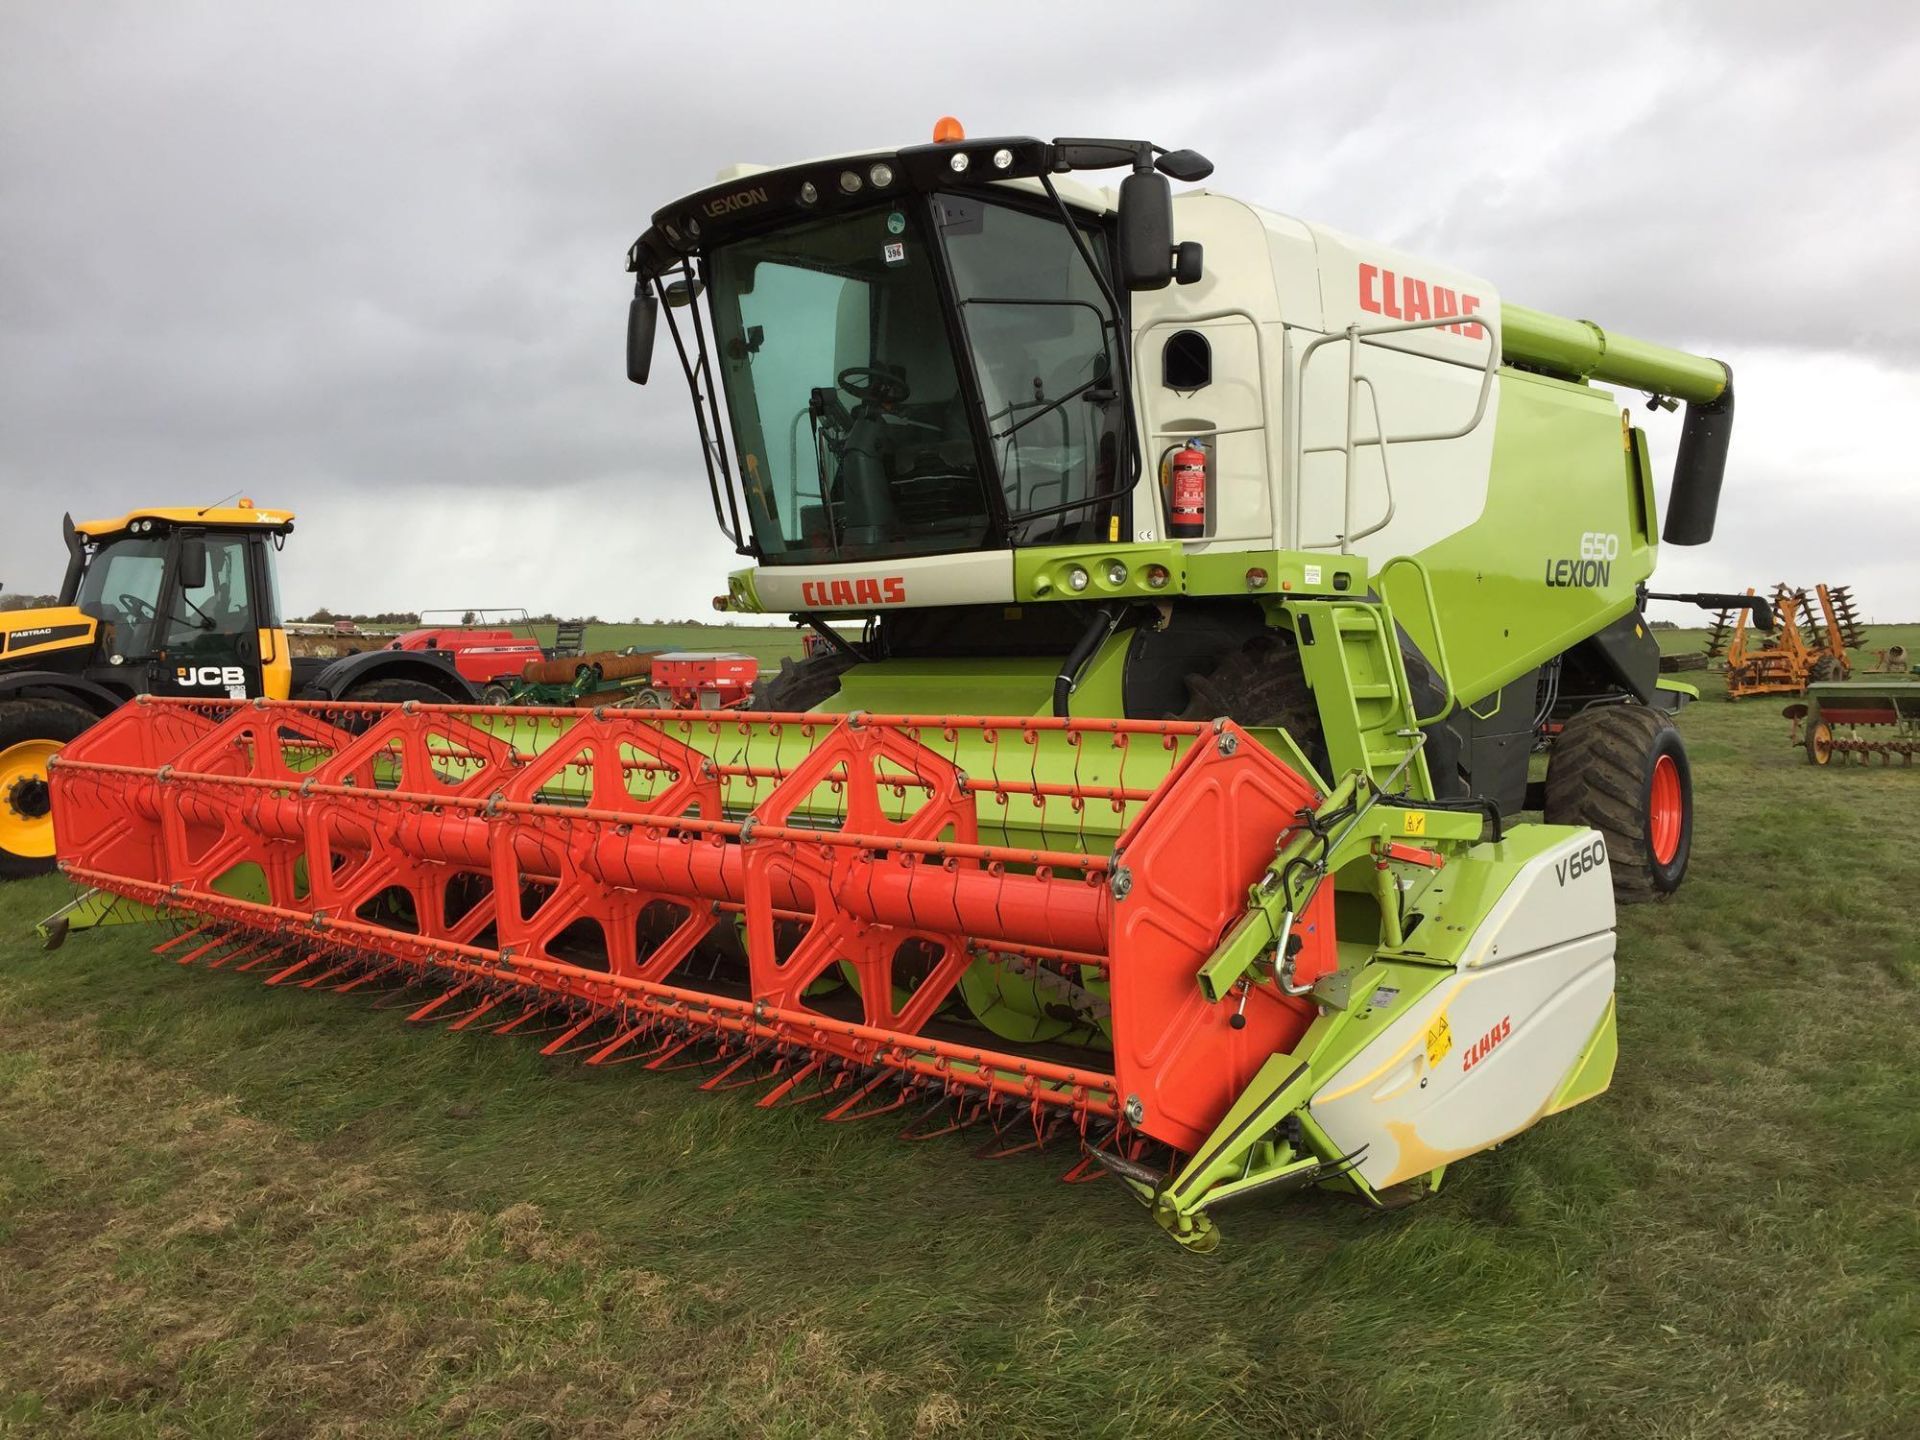 2014 Claas Lexion 650 combine harvester with V660 (22ft) header and header trolley with side knife a